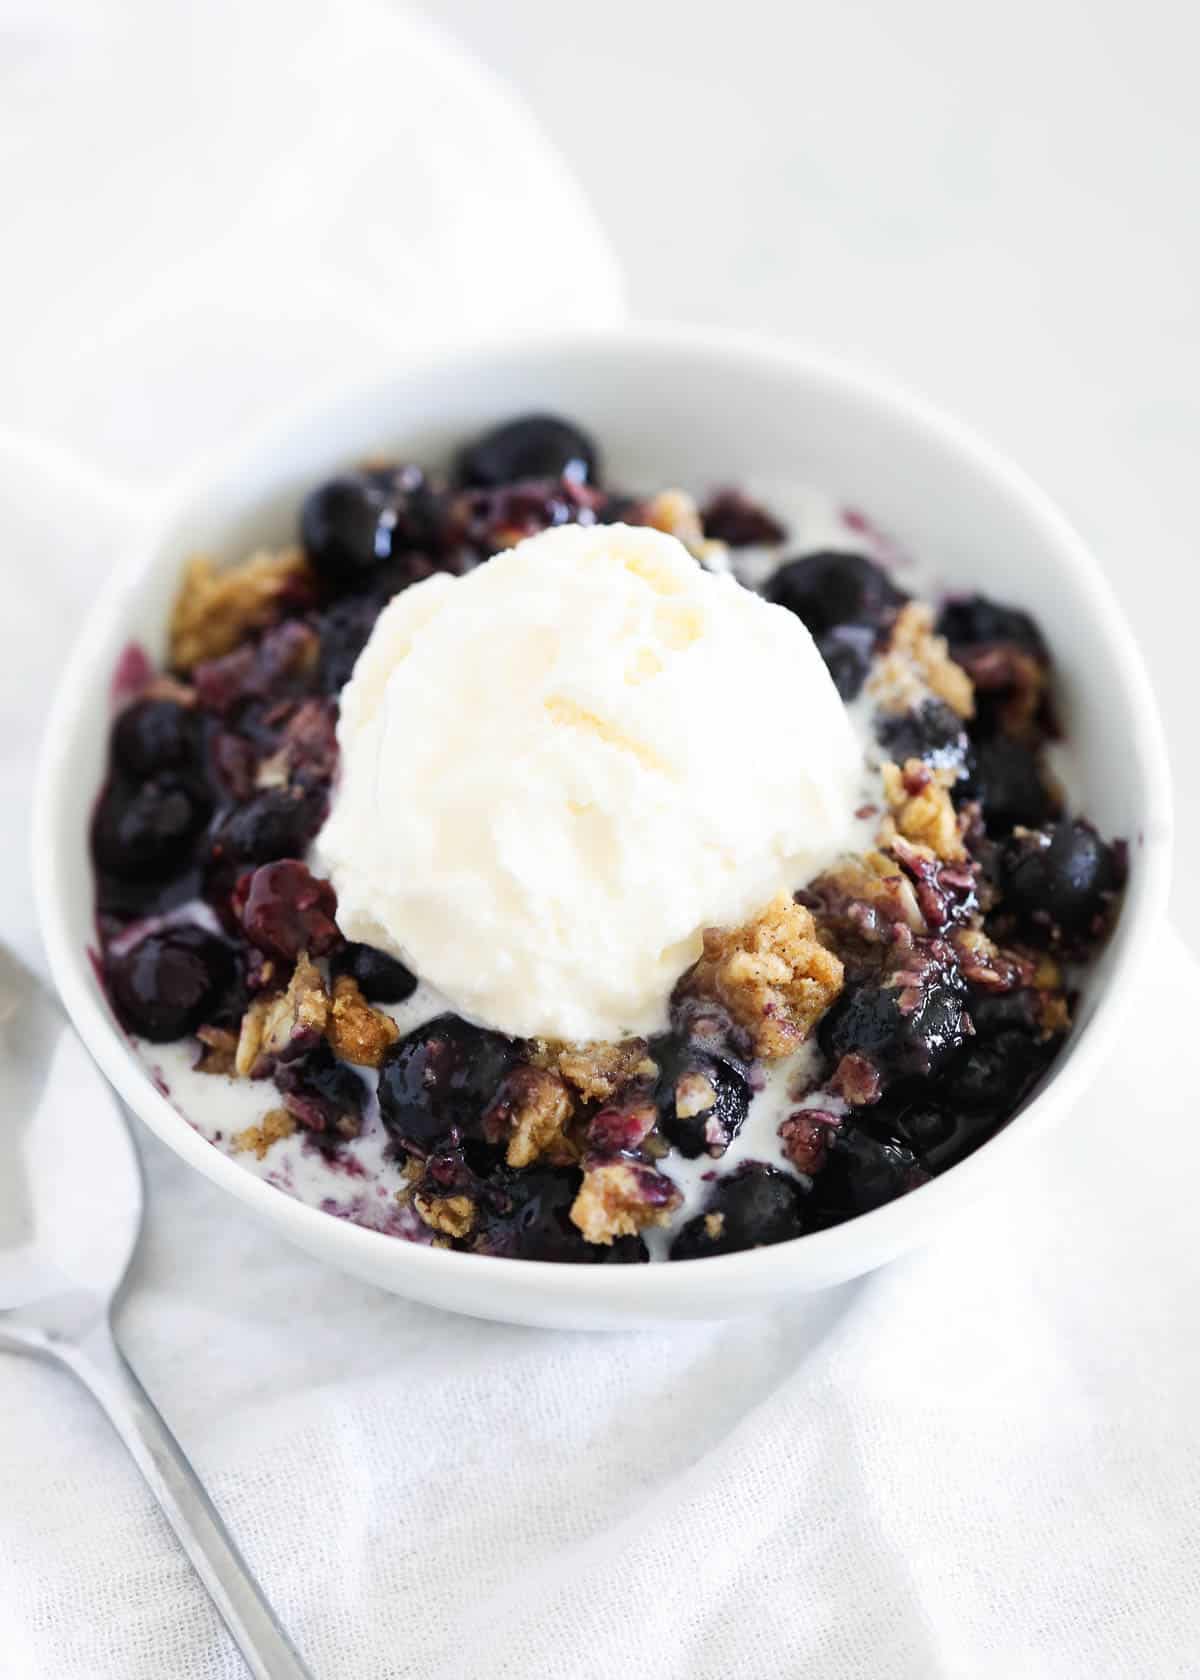 Blueberry crisp with ice cream in a bowl.